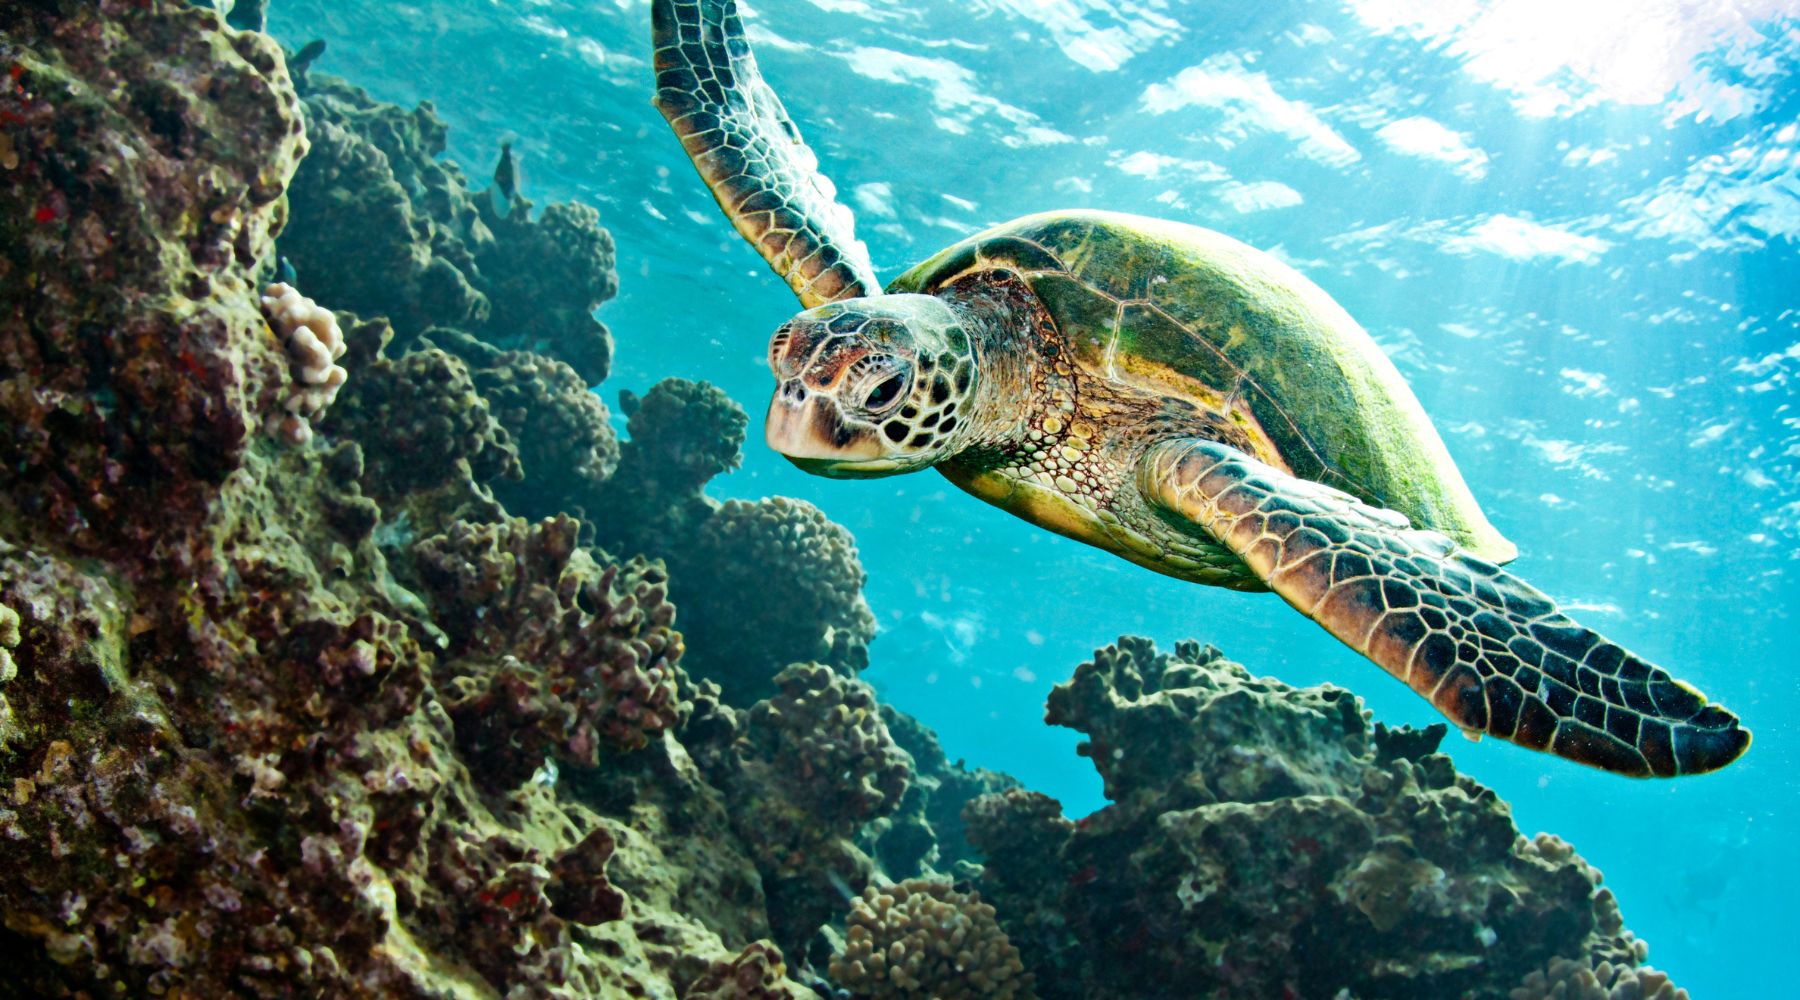 1,2,3,4,5,6,7,8,9,10 Important Facinating Facts About Sea Turtles You Didn't Know - Forever Wildlife